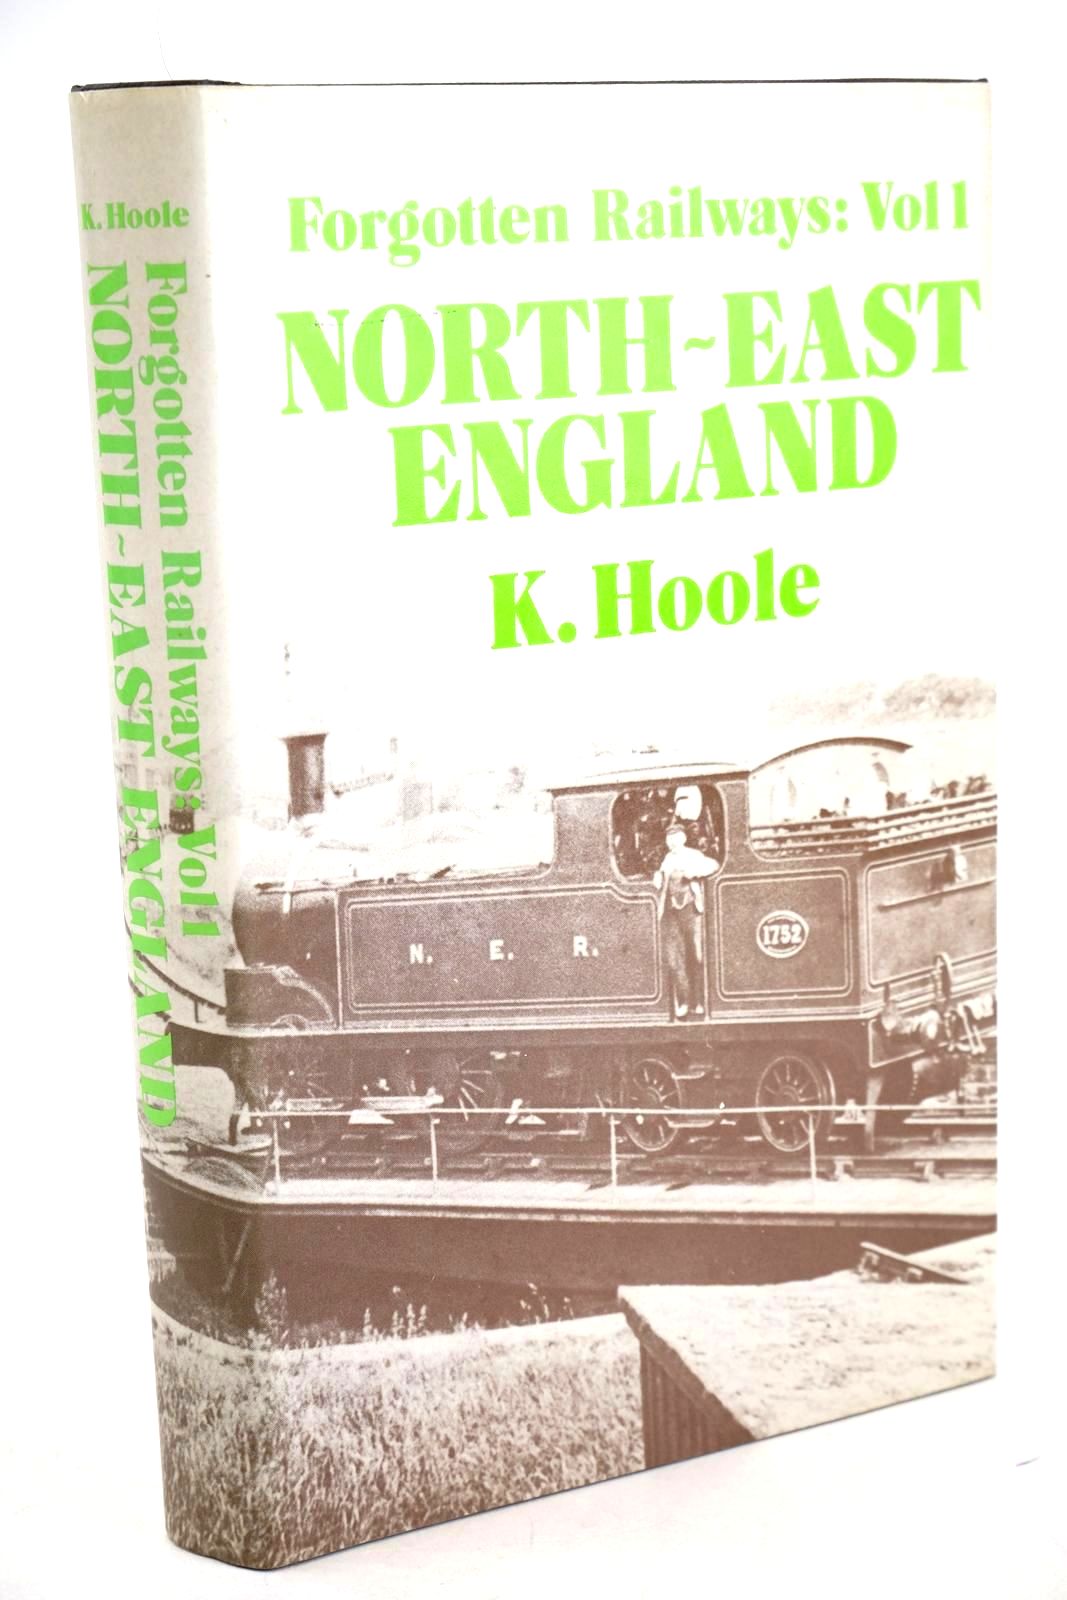 Photo of FORGOTTEN RAILWAYS: NORTH-EAST ENGLAND written by Hoole, Ken published by David St John Thomas (STOCK CODE: 1327438)  for sale by Stella & Rose's Books